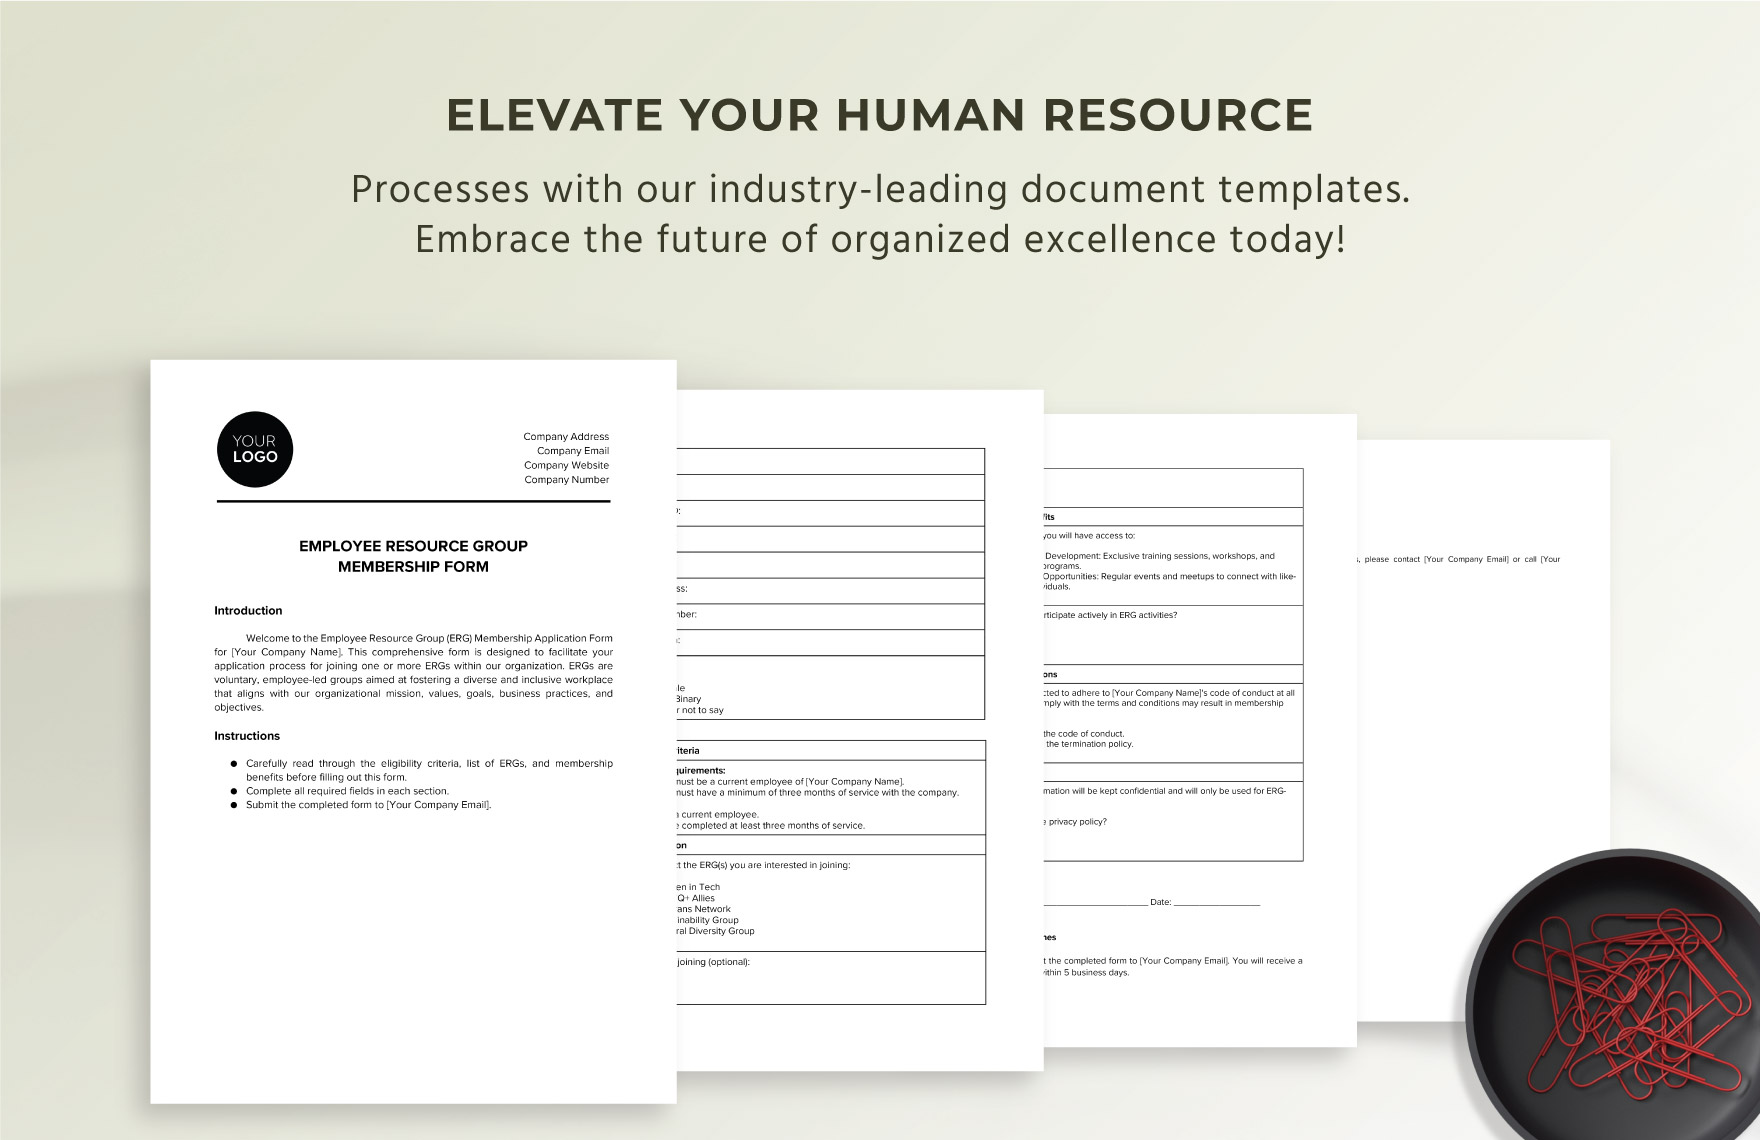 Employee Resource Group Membership Form HR Template